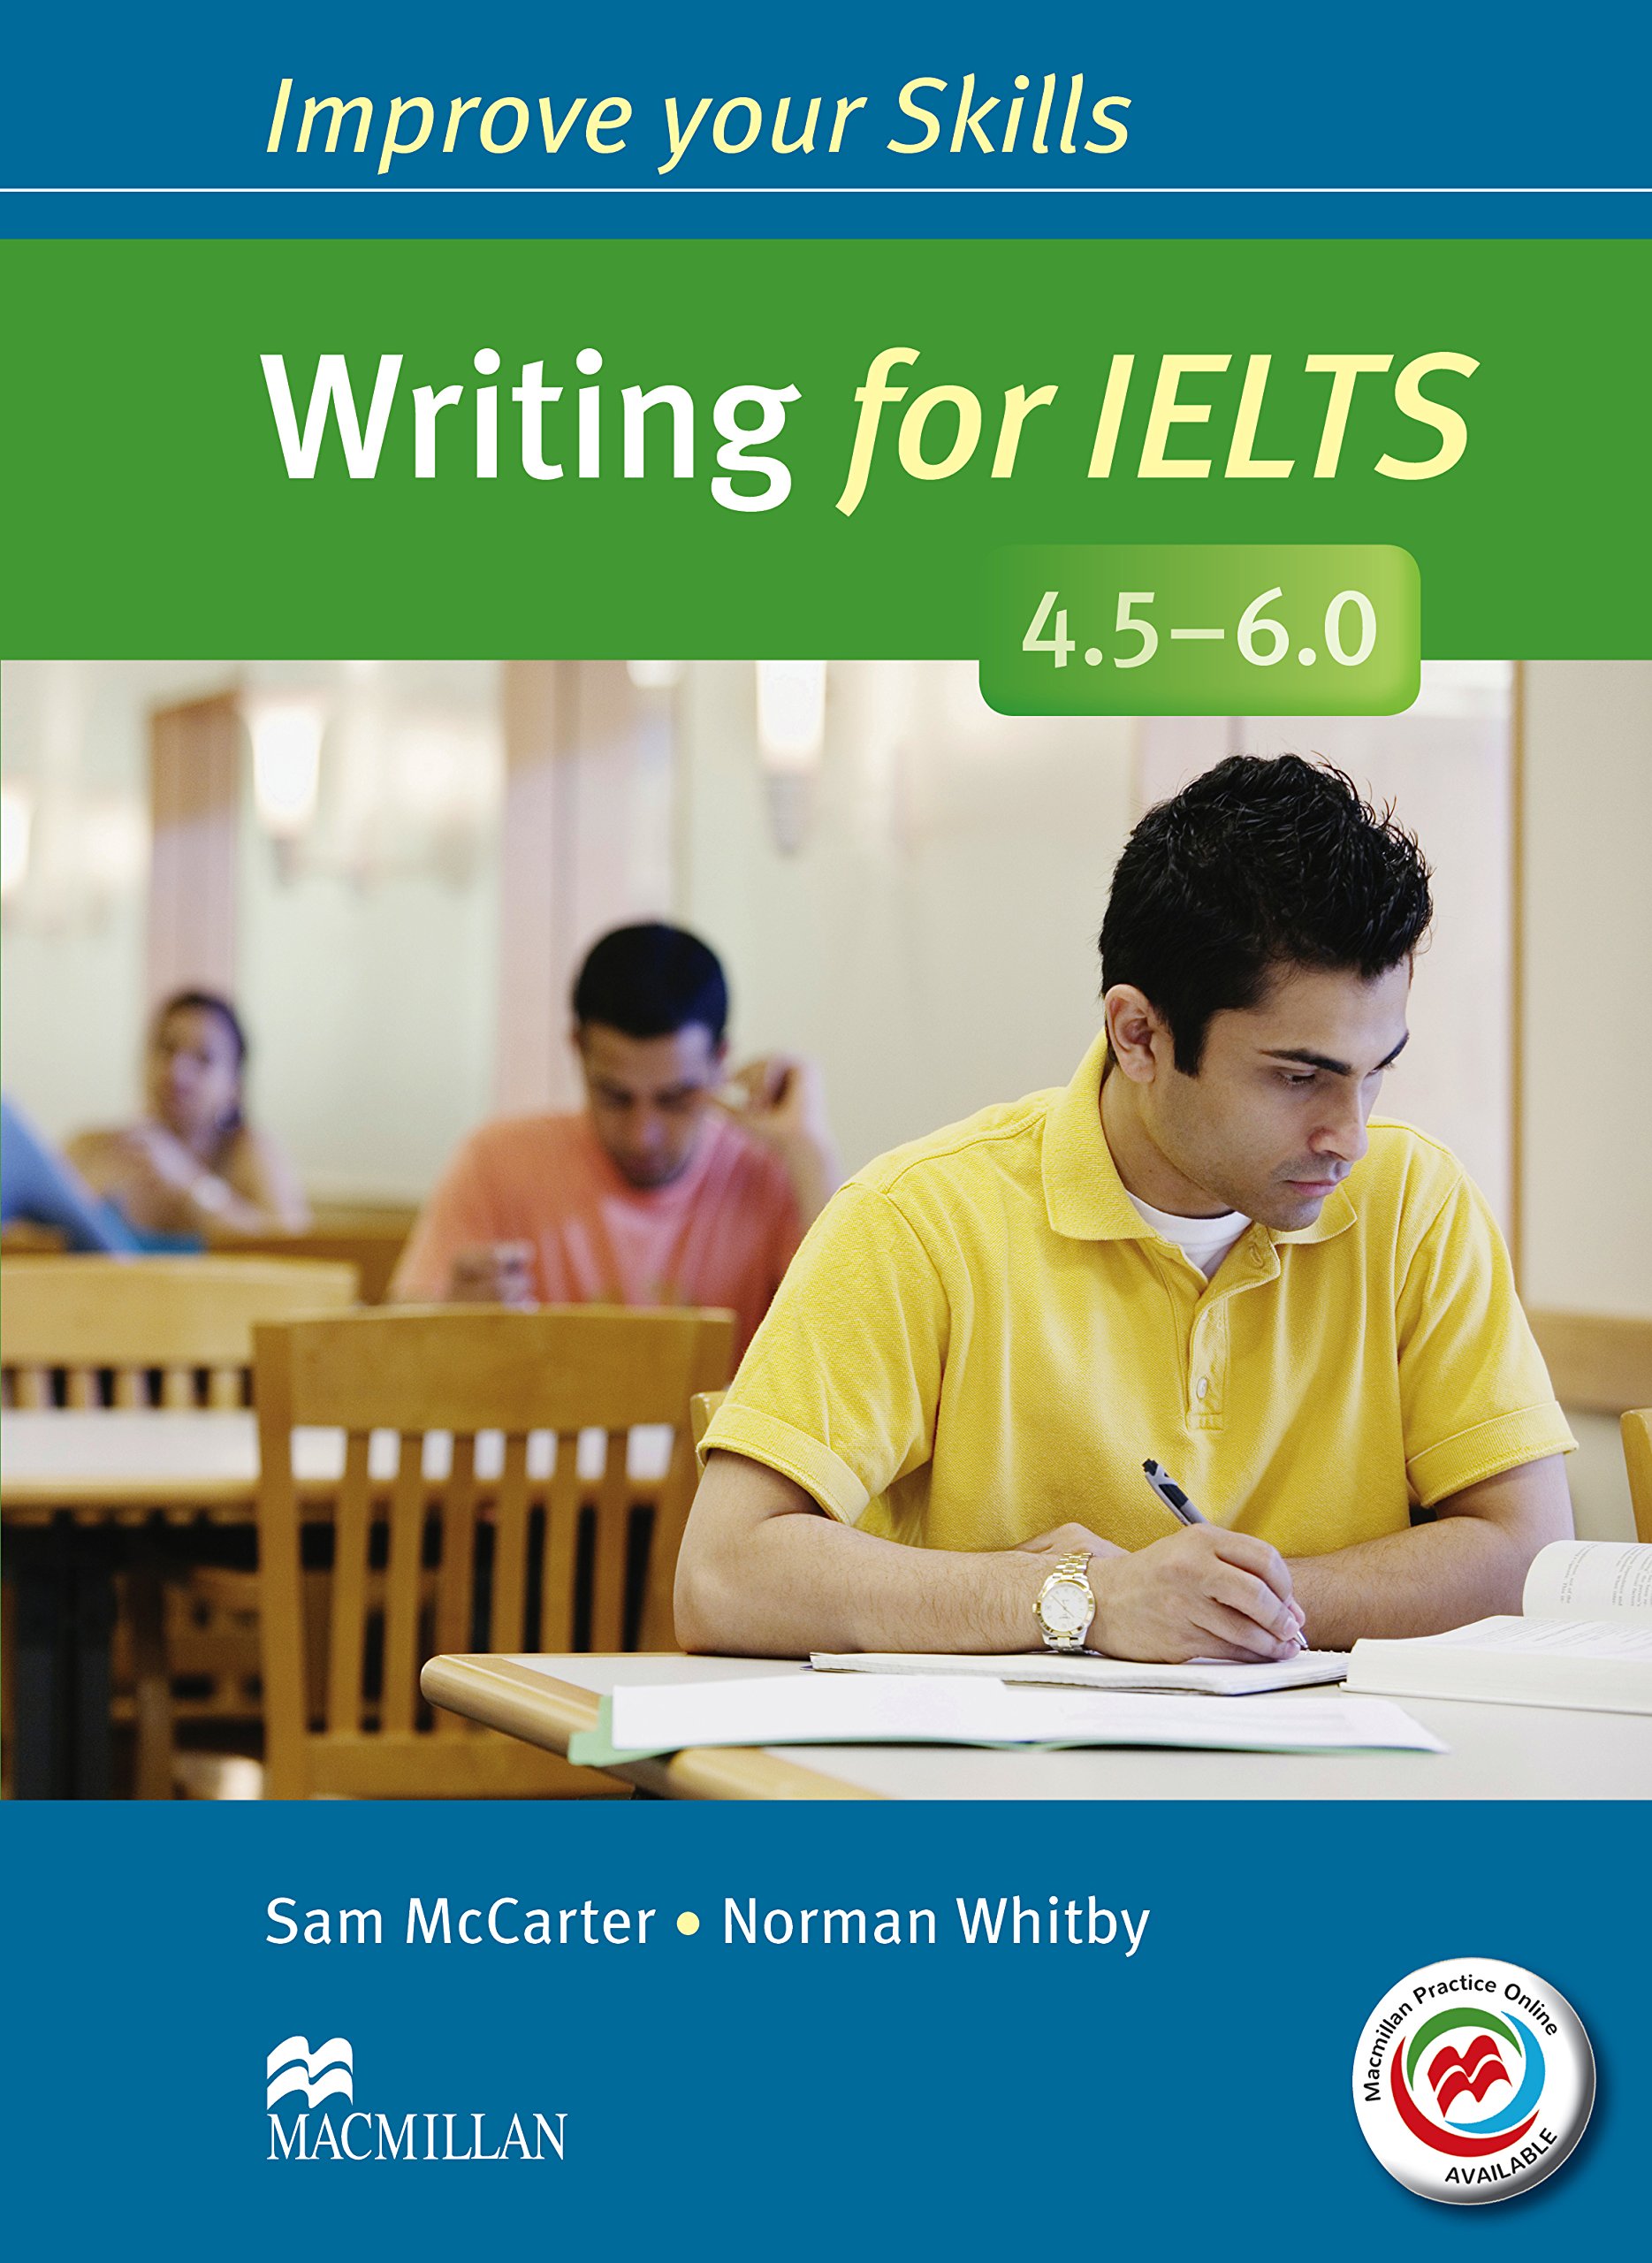 IMPROVE YOUR SKILLS FOR IELTS WRITING 4.5-6 Student's Book without Answers + MPO Webcode